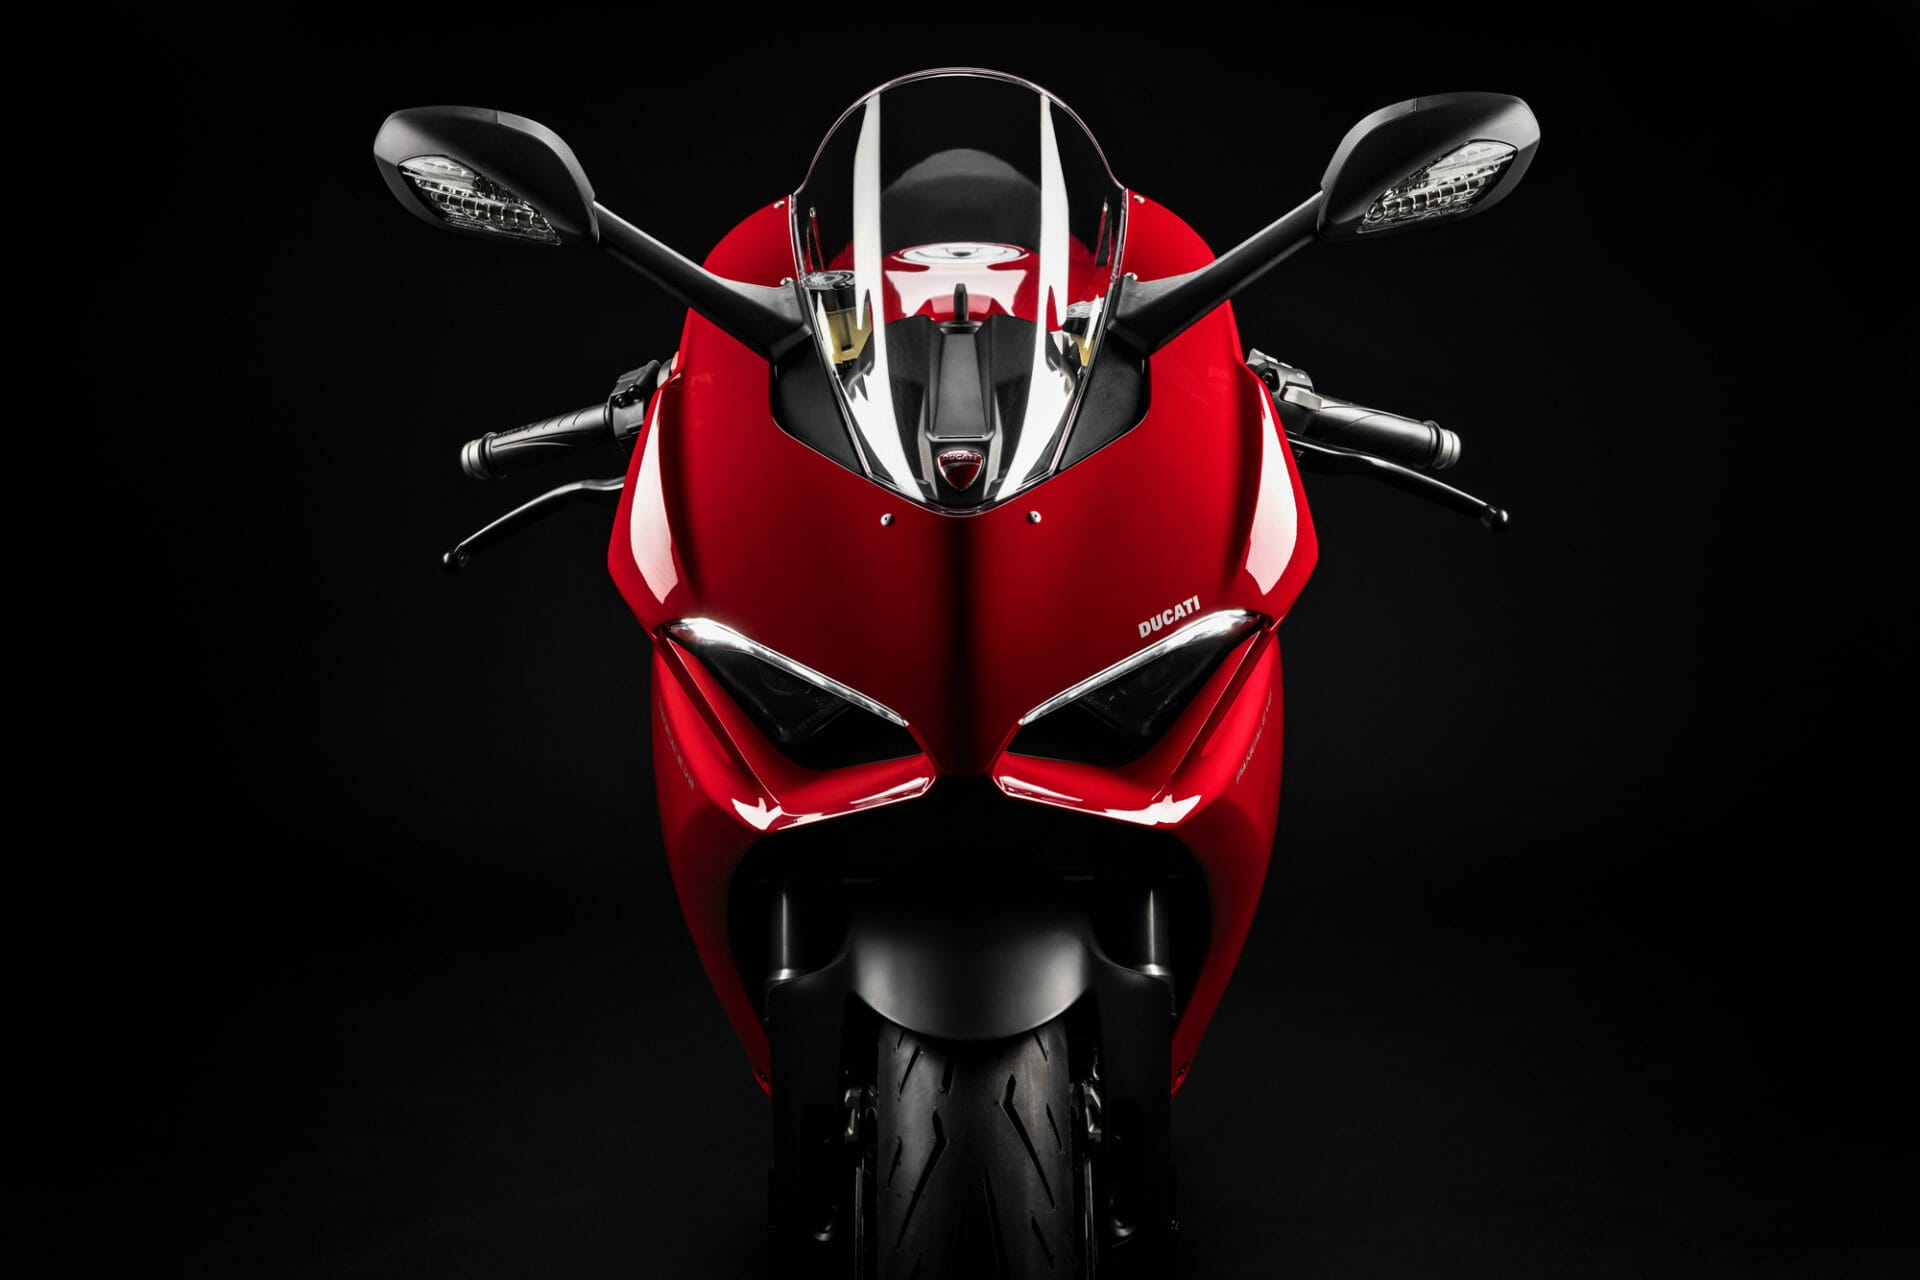 Ducati recalls Panigale V2 models: software bug affects headlights